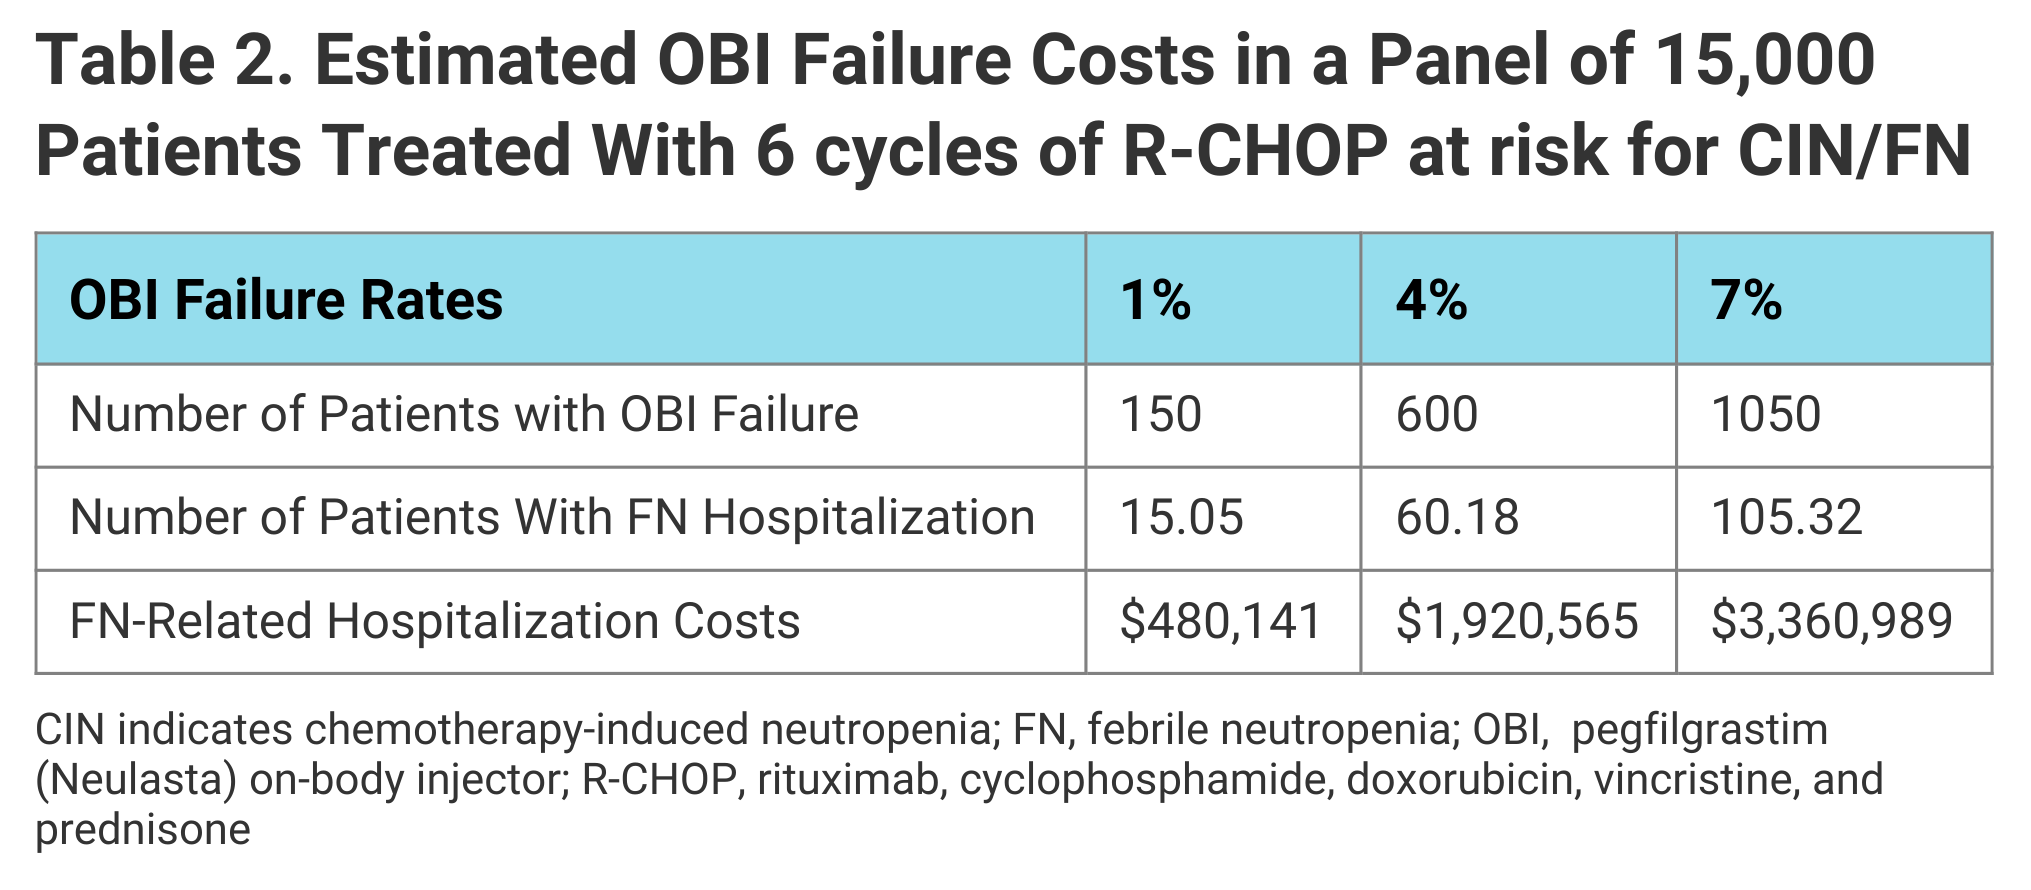 Table 2. Estimated OBI Failure Costs in a Panel of 15,000 Patients Treated With 6 Cycles of R-CHOP at risk for CIN/FN